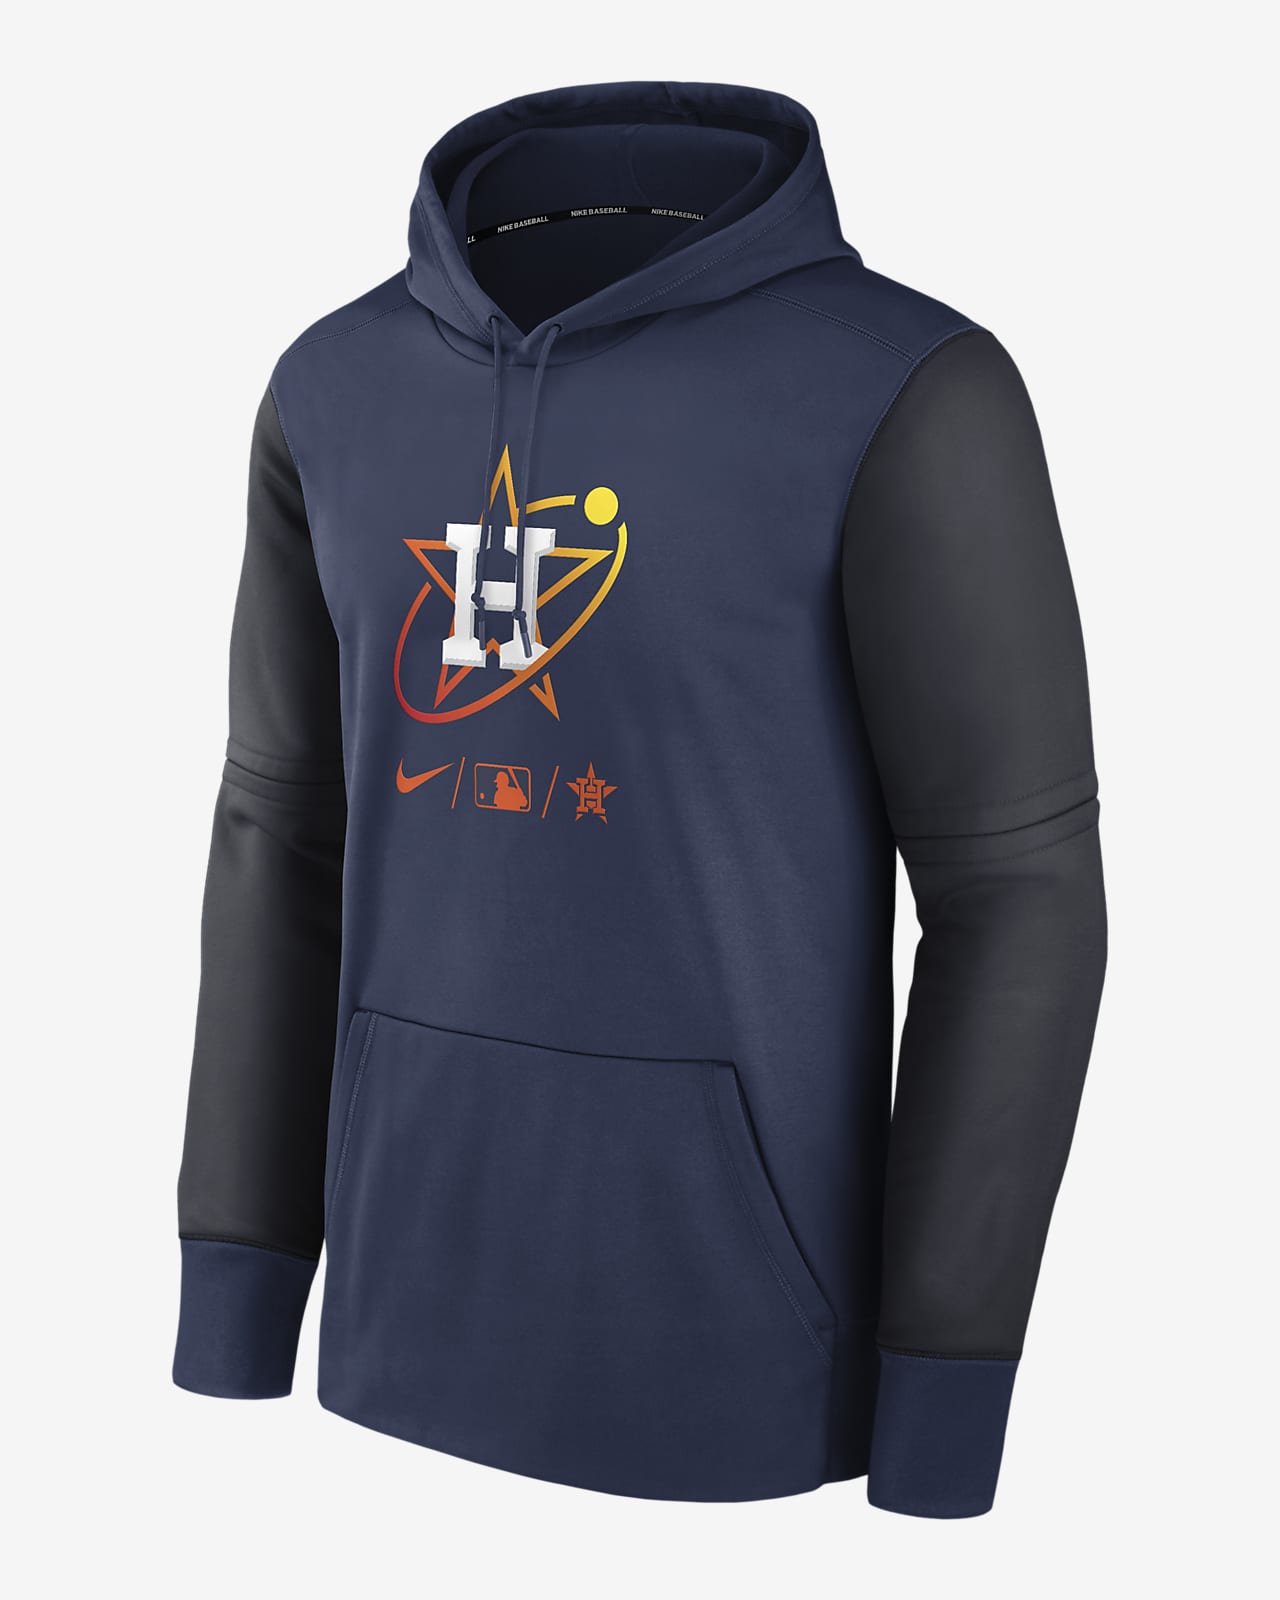 Nike Therma City Connect (MLB Houston Astros) Men's Pullover Hoodie